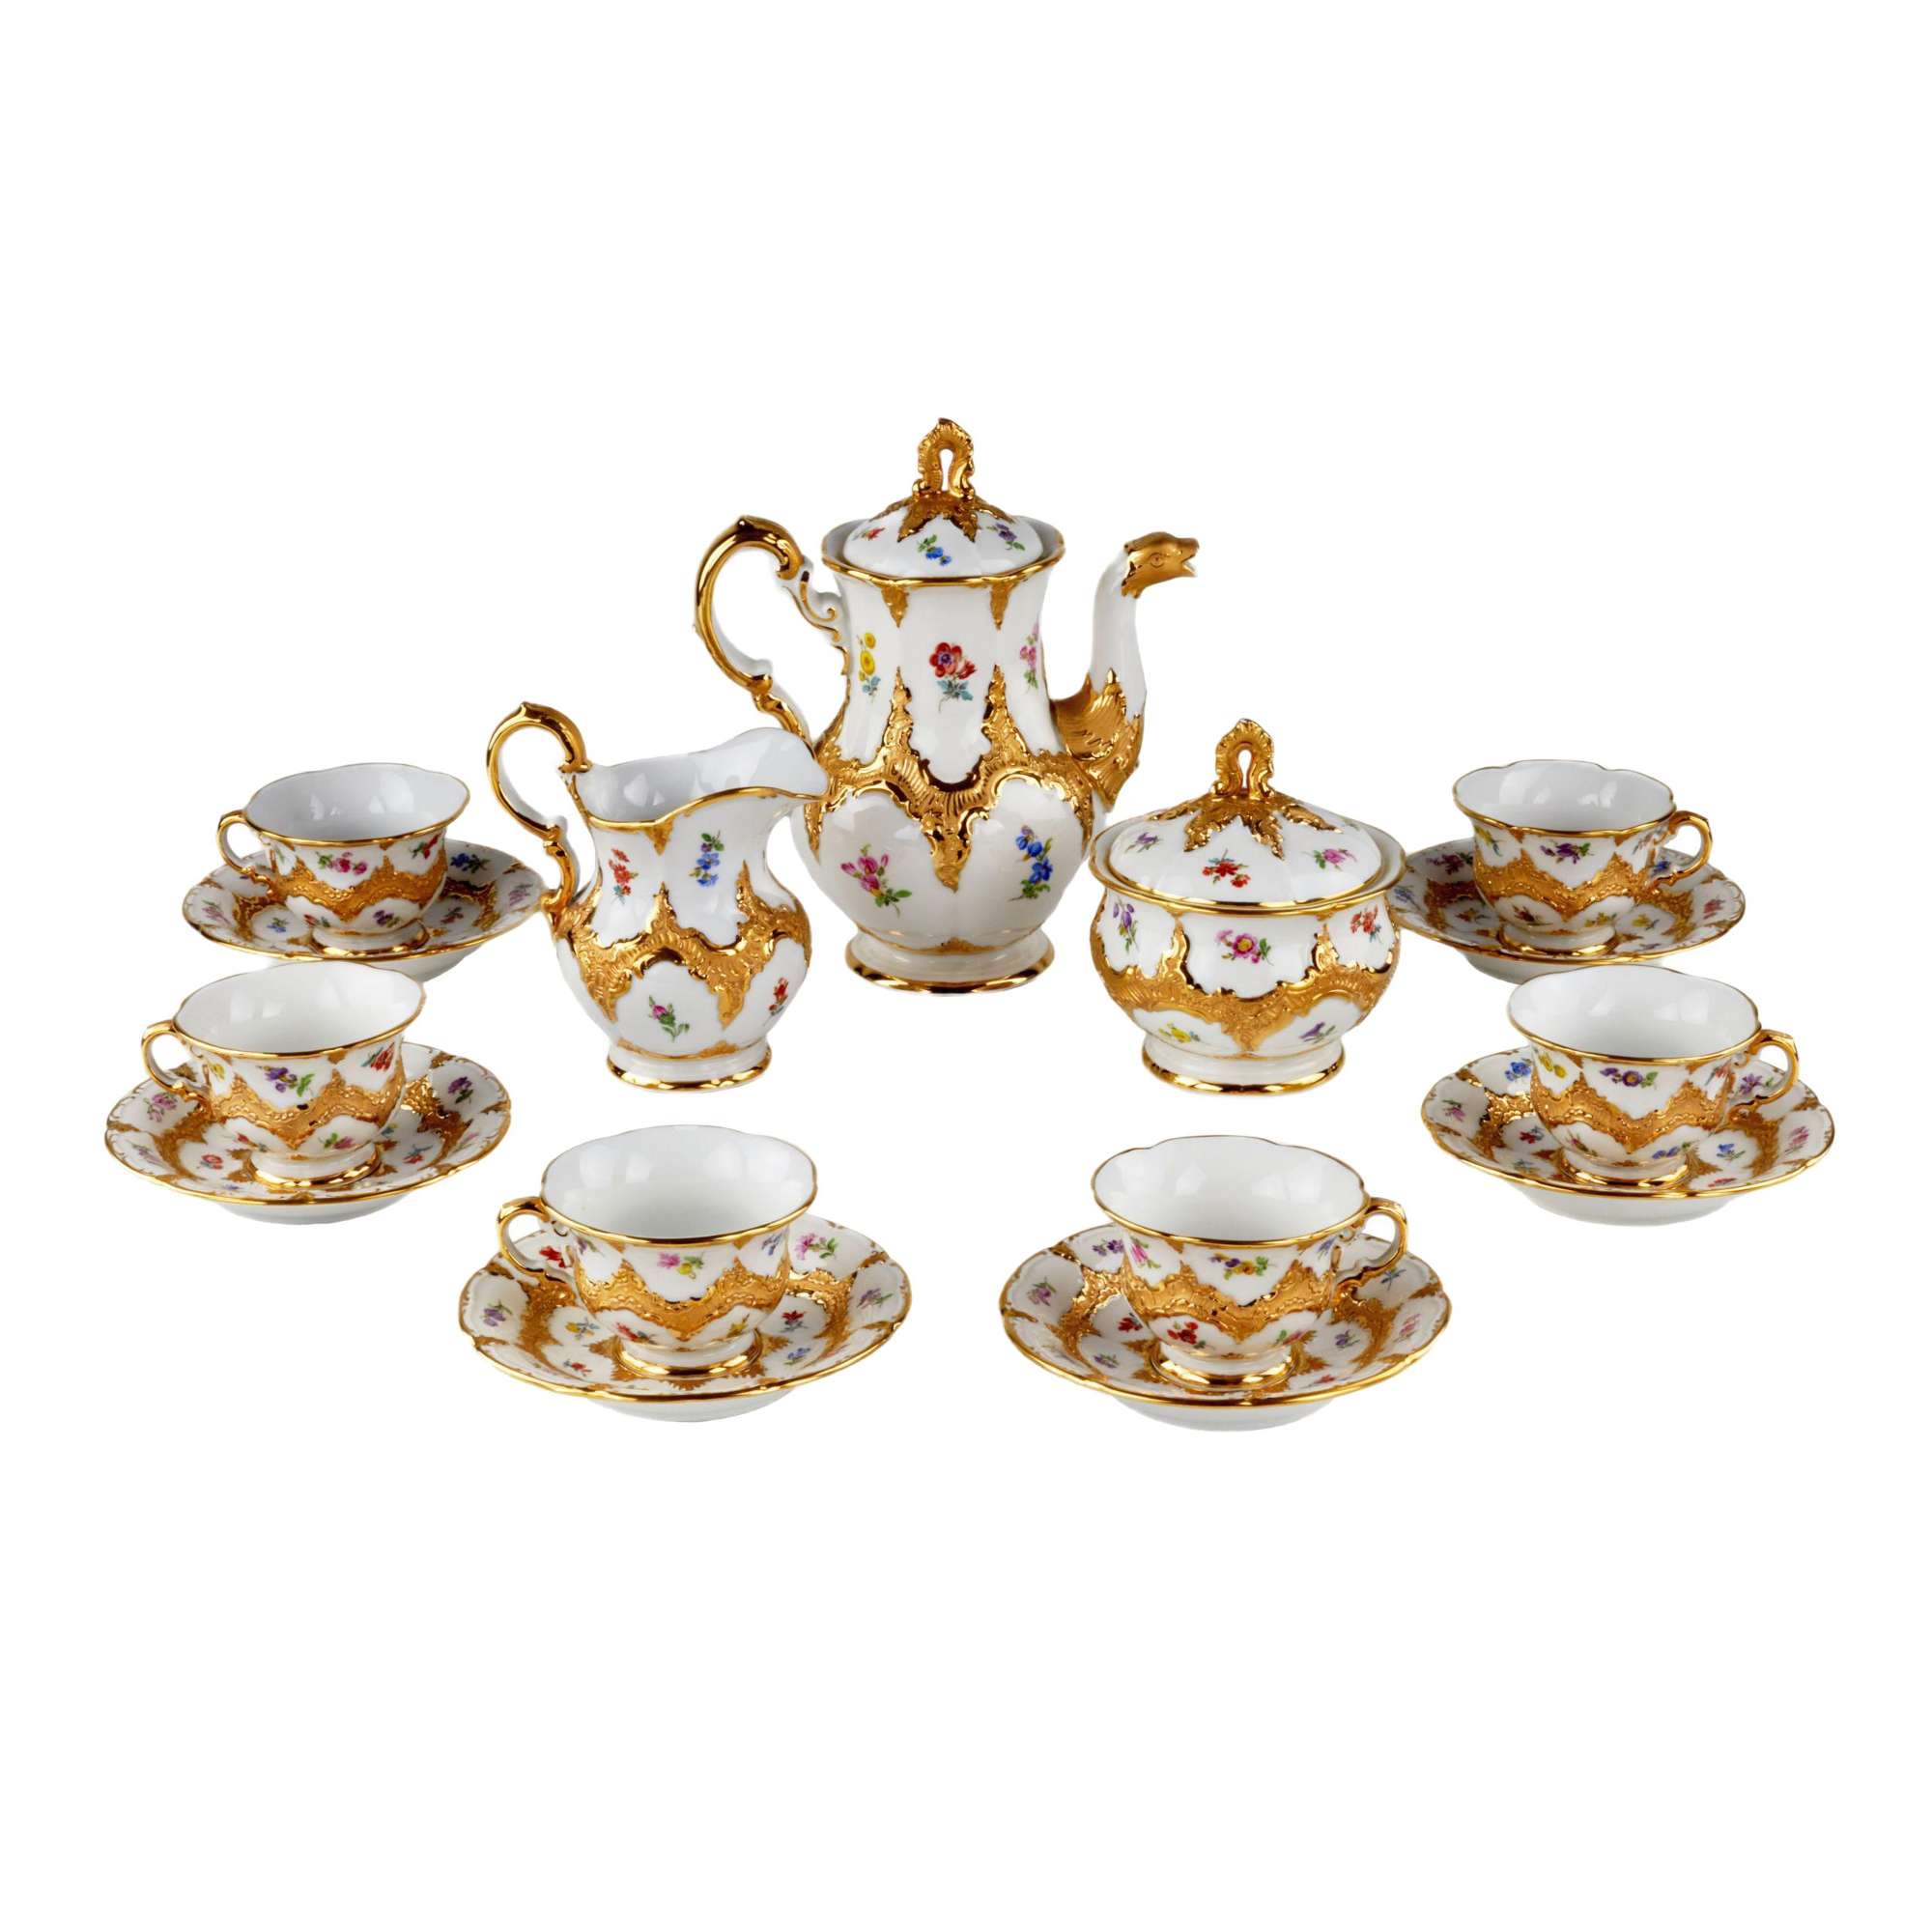 Coffee Service from Meissen for 6 Persons, Set of 15